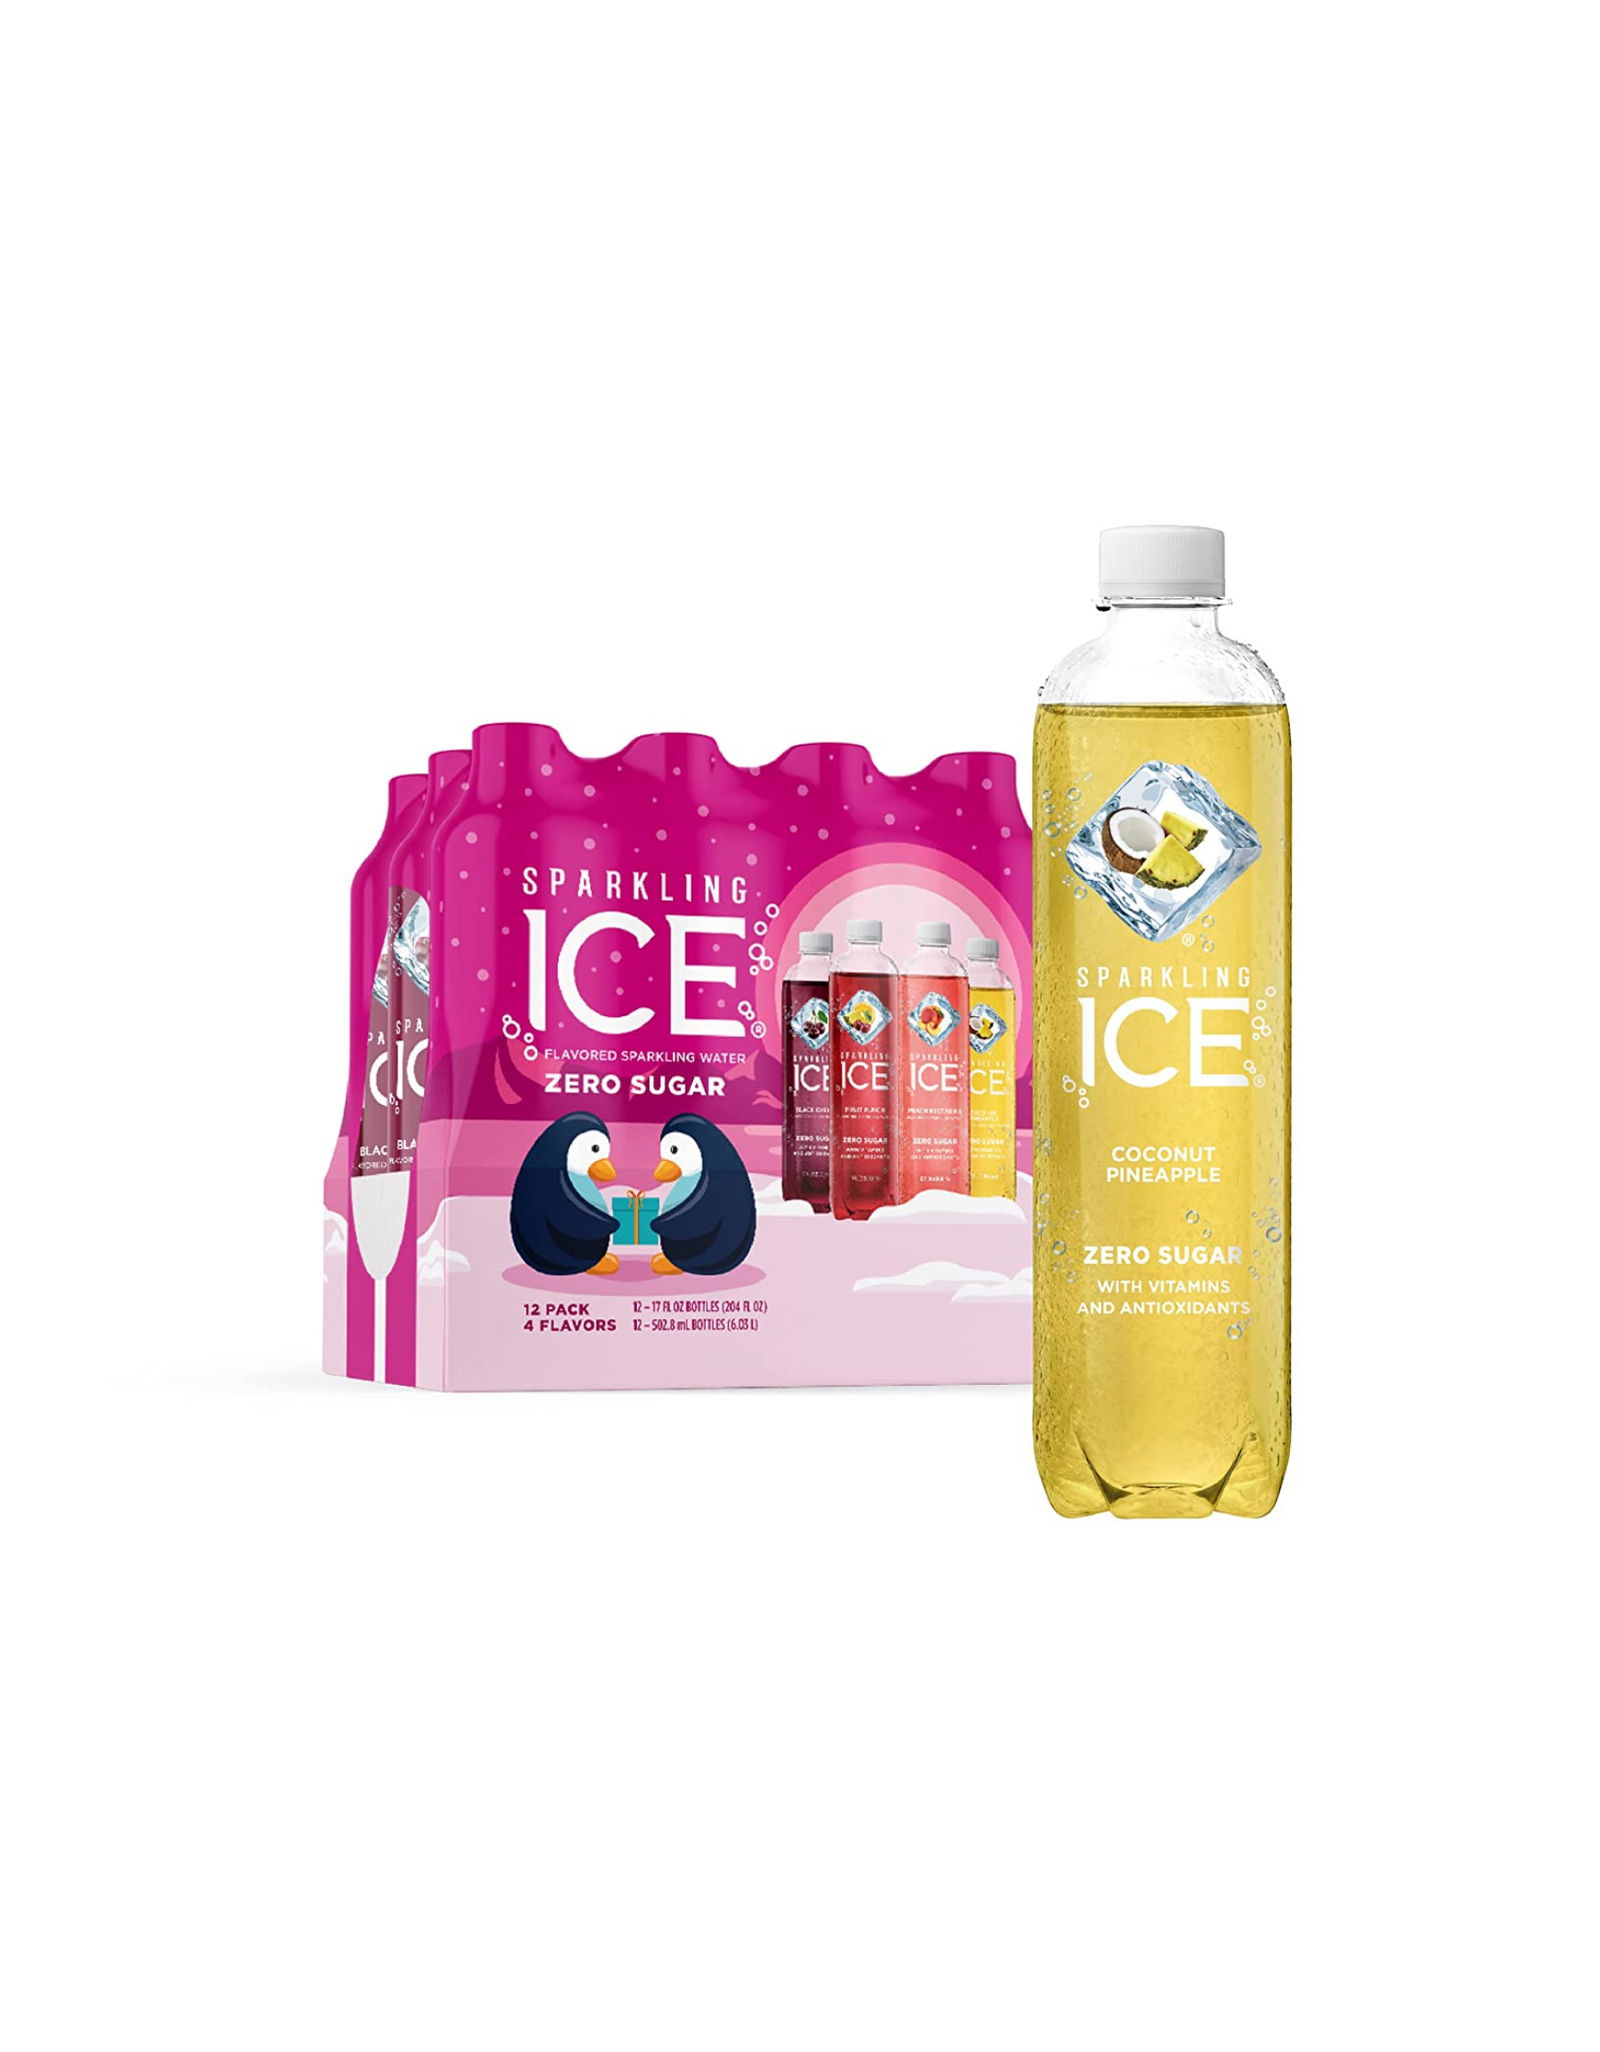 Sparkling Ice Black Cherry, Peach Nectarine, Coconut Pineapple, Fruit Punch Variety Pack, 17 fl oz (Pack of 12)